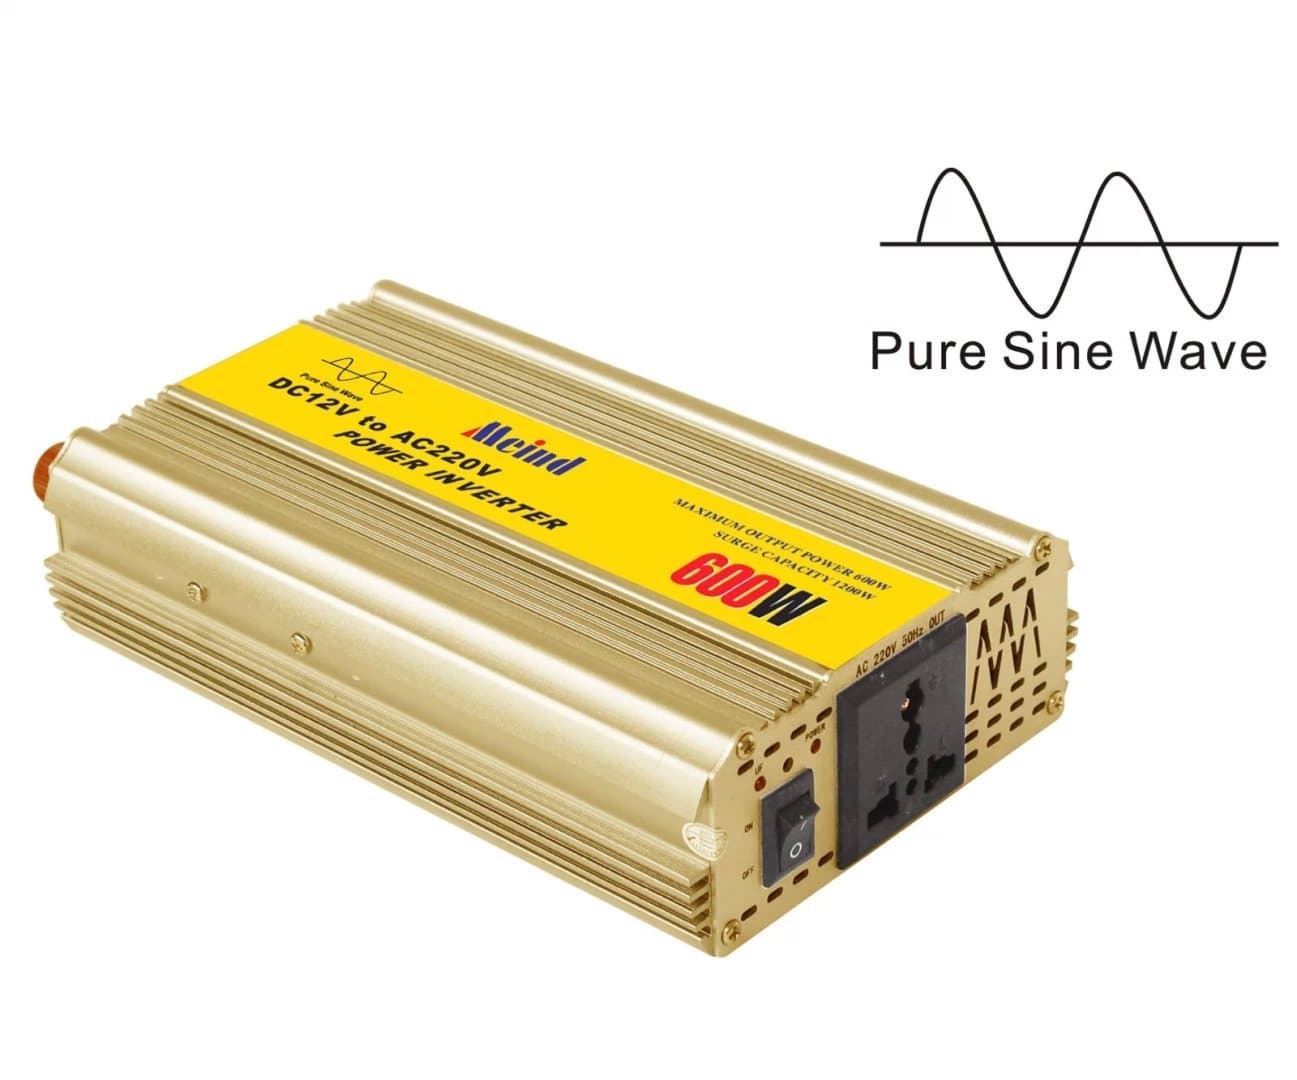 Pure sine wave power inverter for solar syste